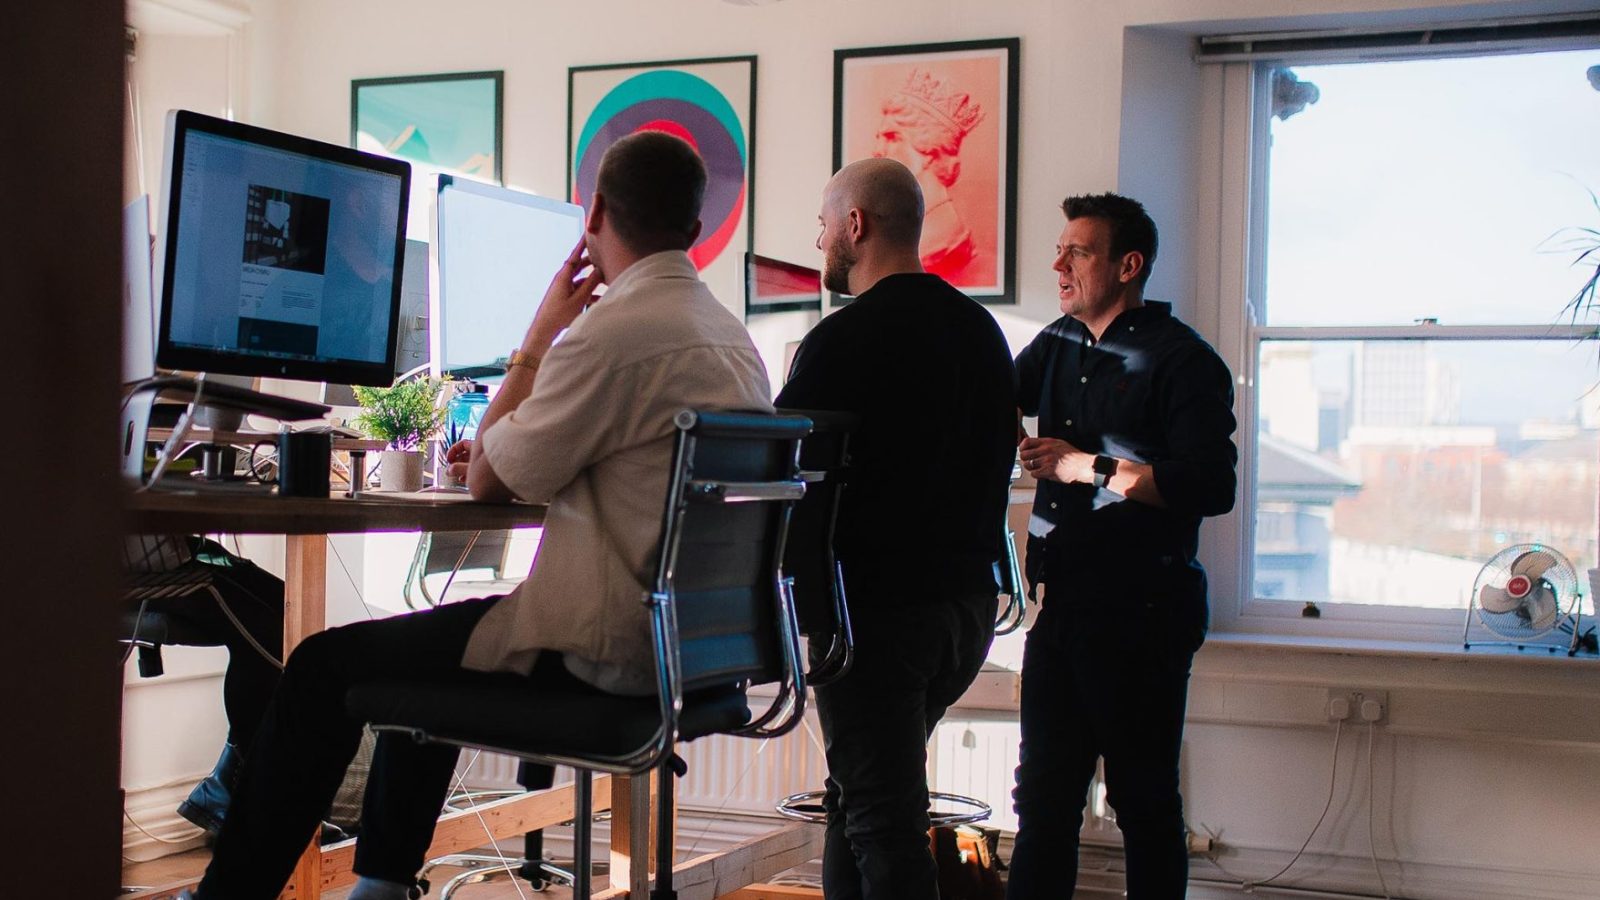 Three men in a sunny, artful office at a design agency; two are discussing careers while the third focuses on his computer work. The room is vibrant with wall art and large windows.